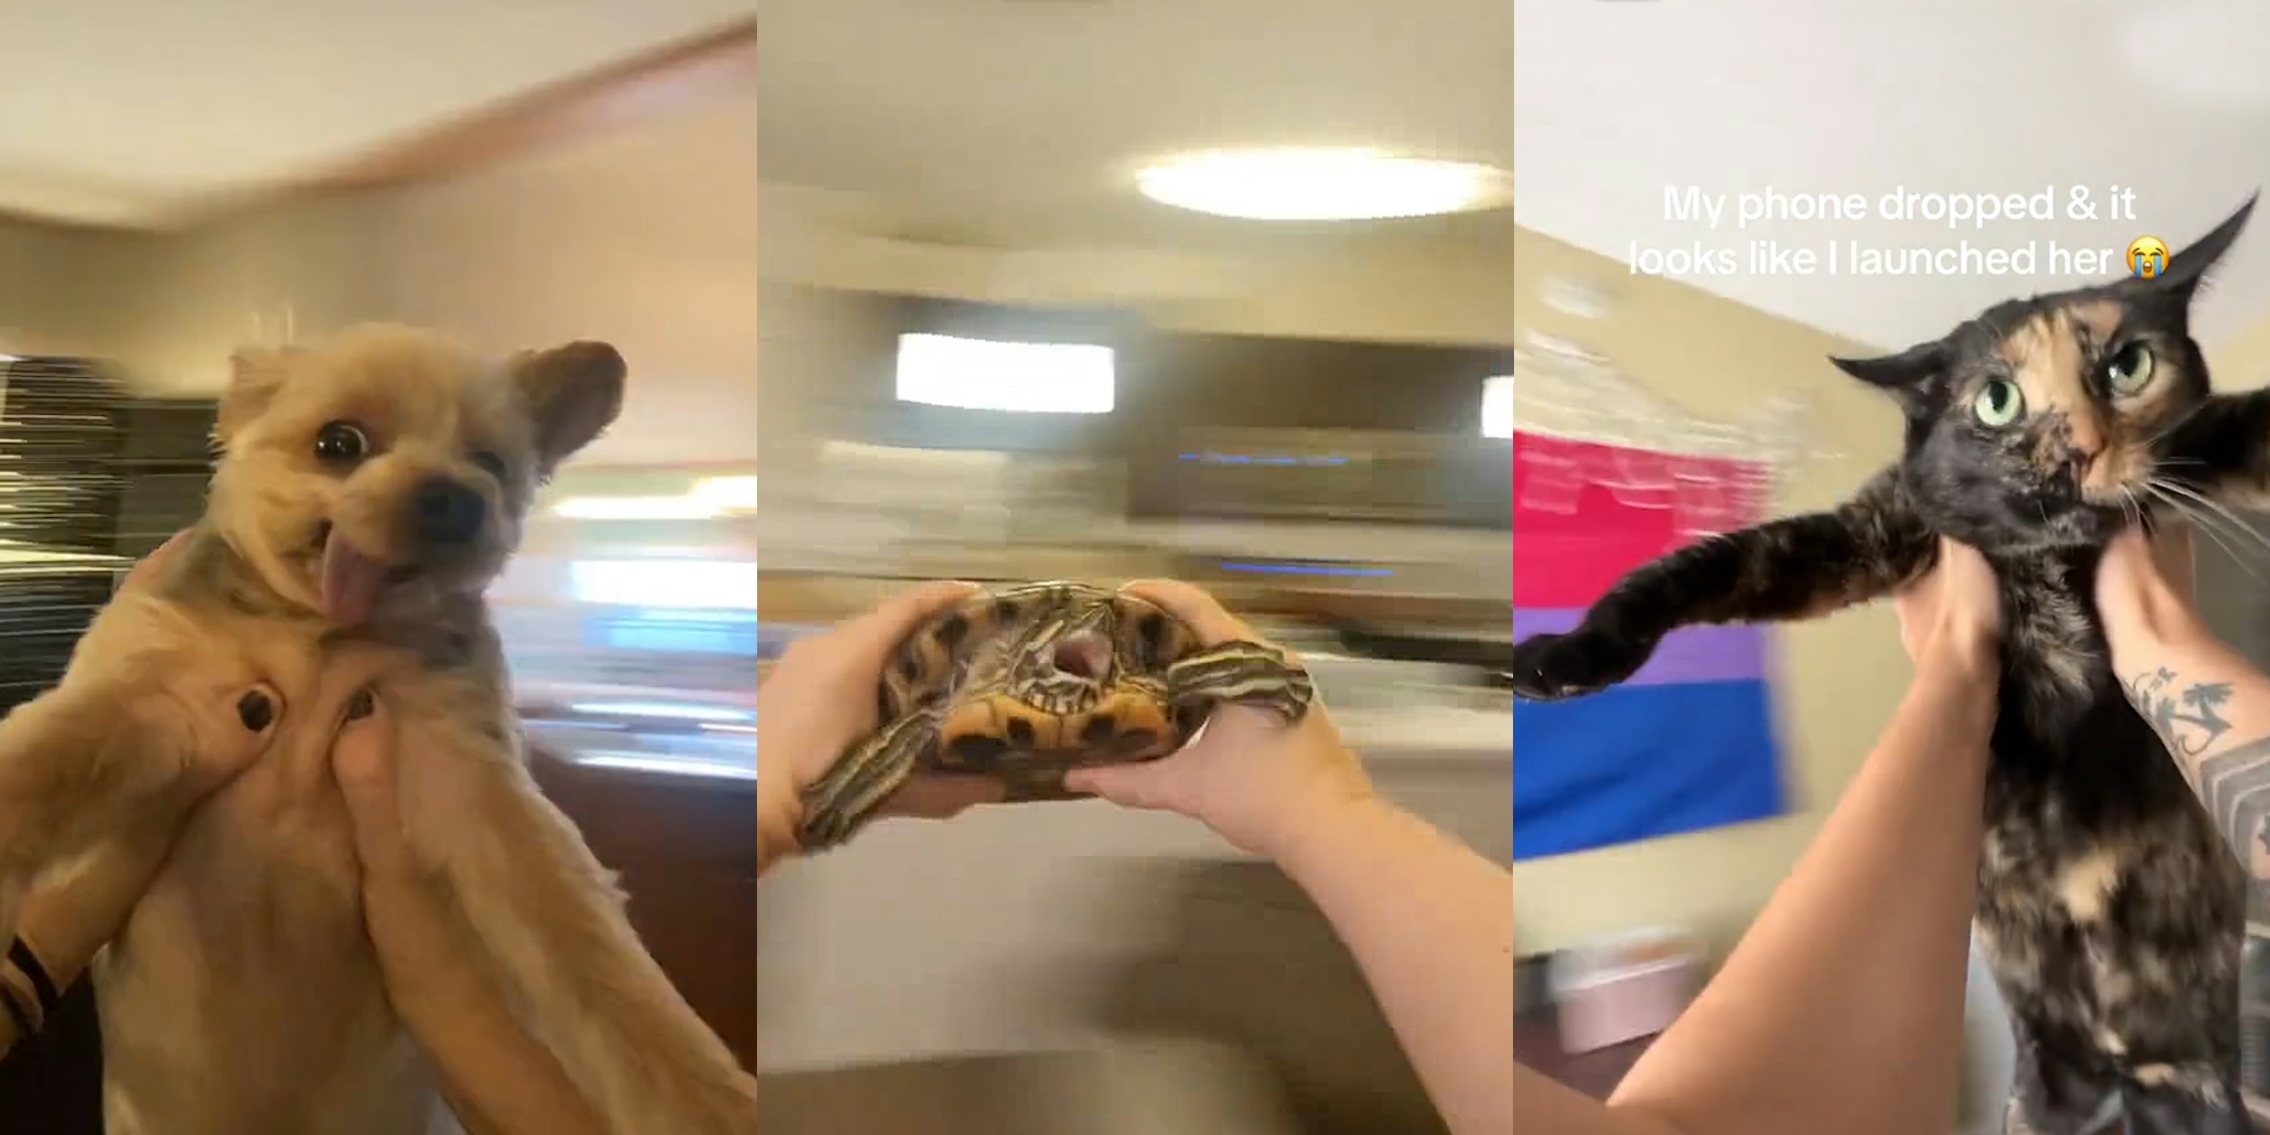 dog being spun by owner (l) turtle being spun by owner (c) cat being spun by owner with caption 'My phone dropped & it looks like i launched her' (r)